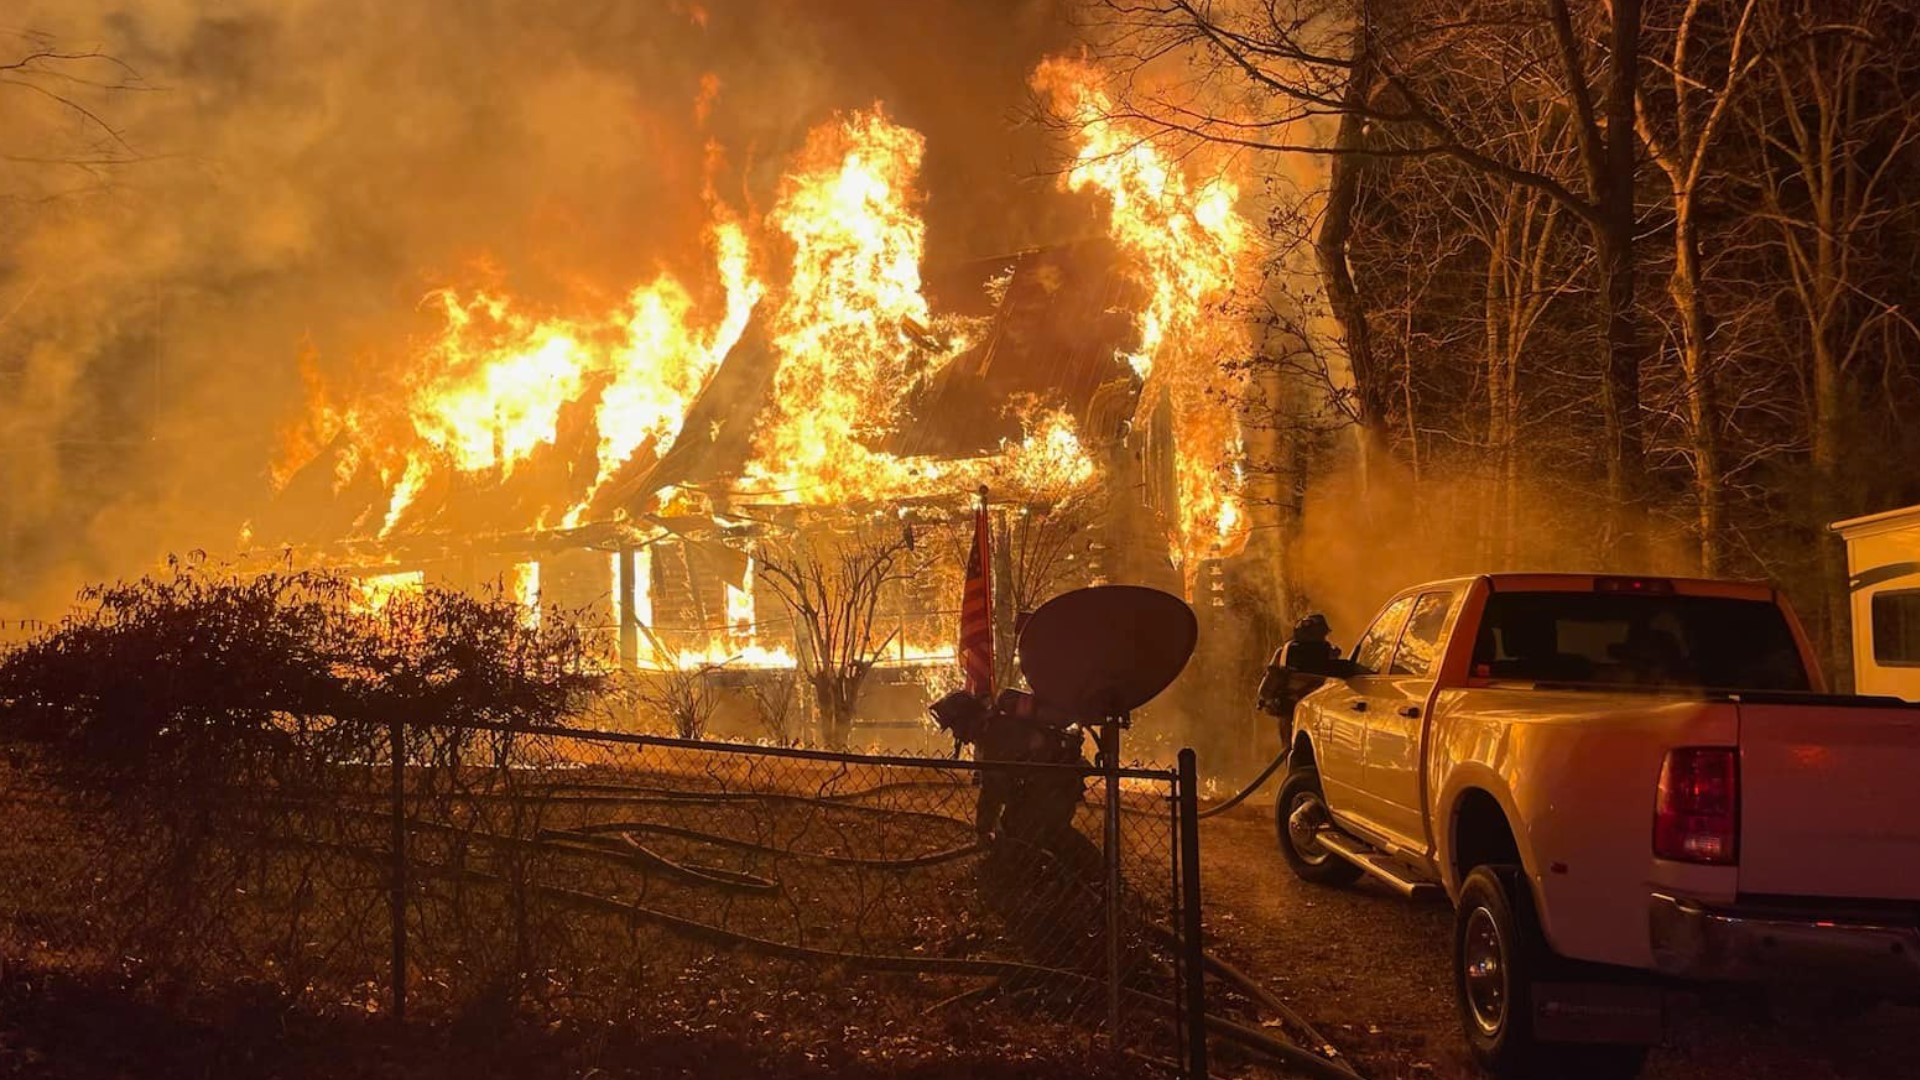 One person is dead after a house fire in Wedington Woods.